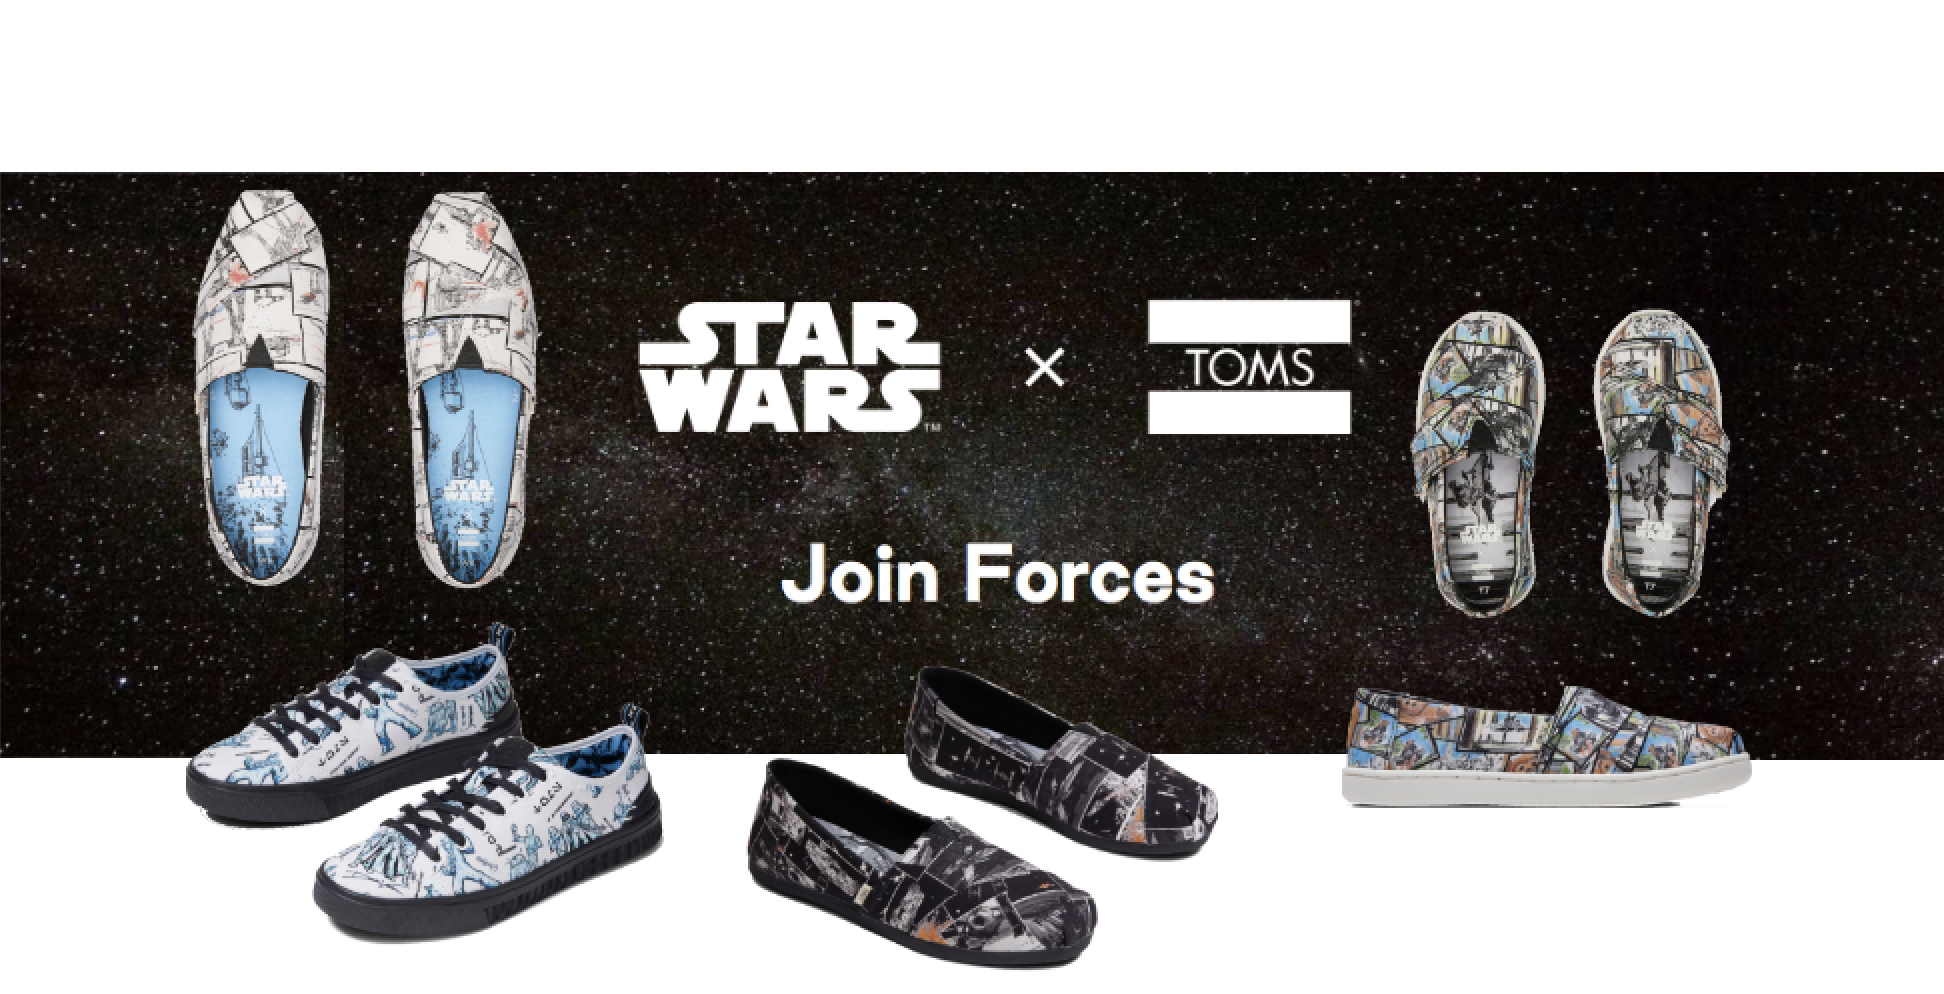 TOMS x Star Wars Collection Launching July 2nd